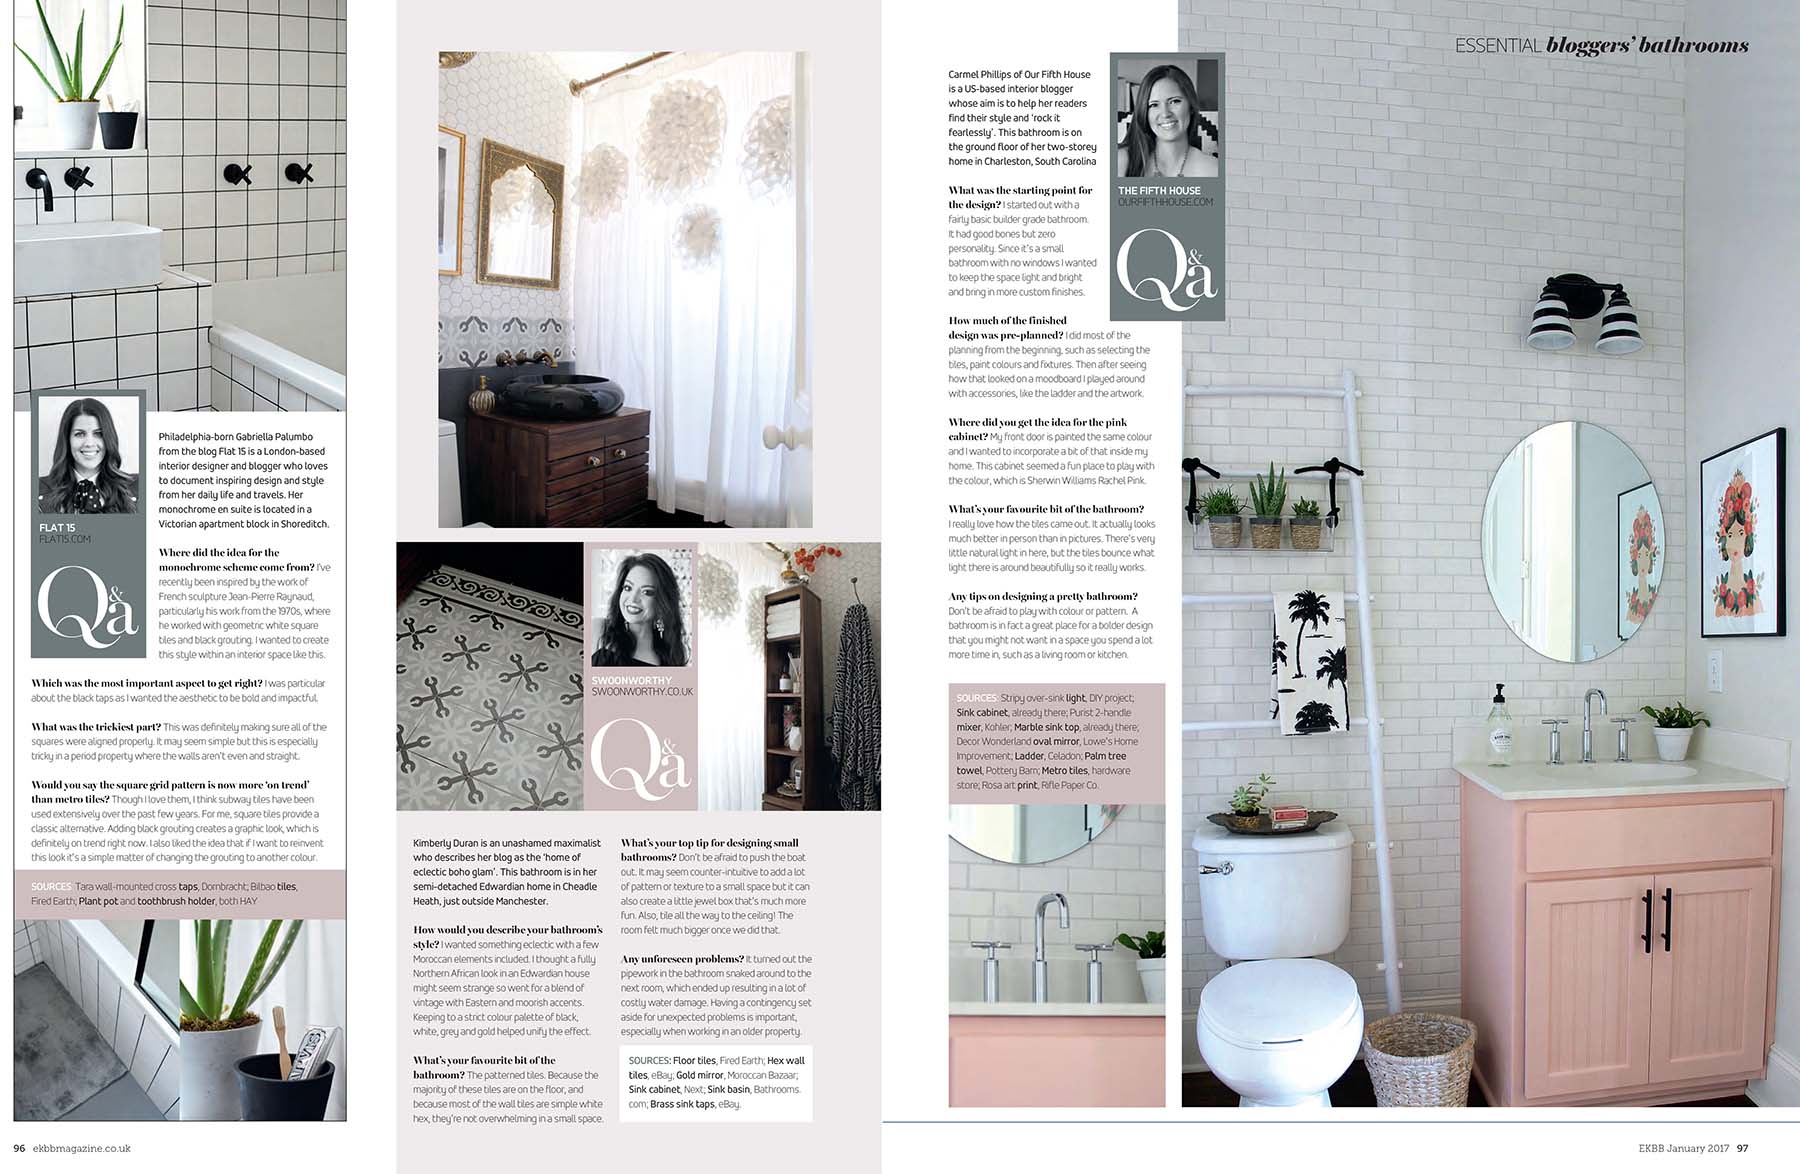 Interior bloggers bathrooms SwoonWorthy and The Fifth House